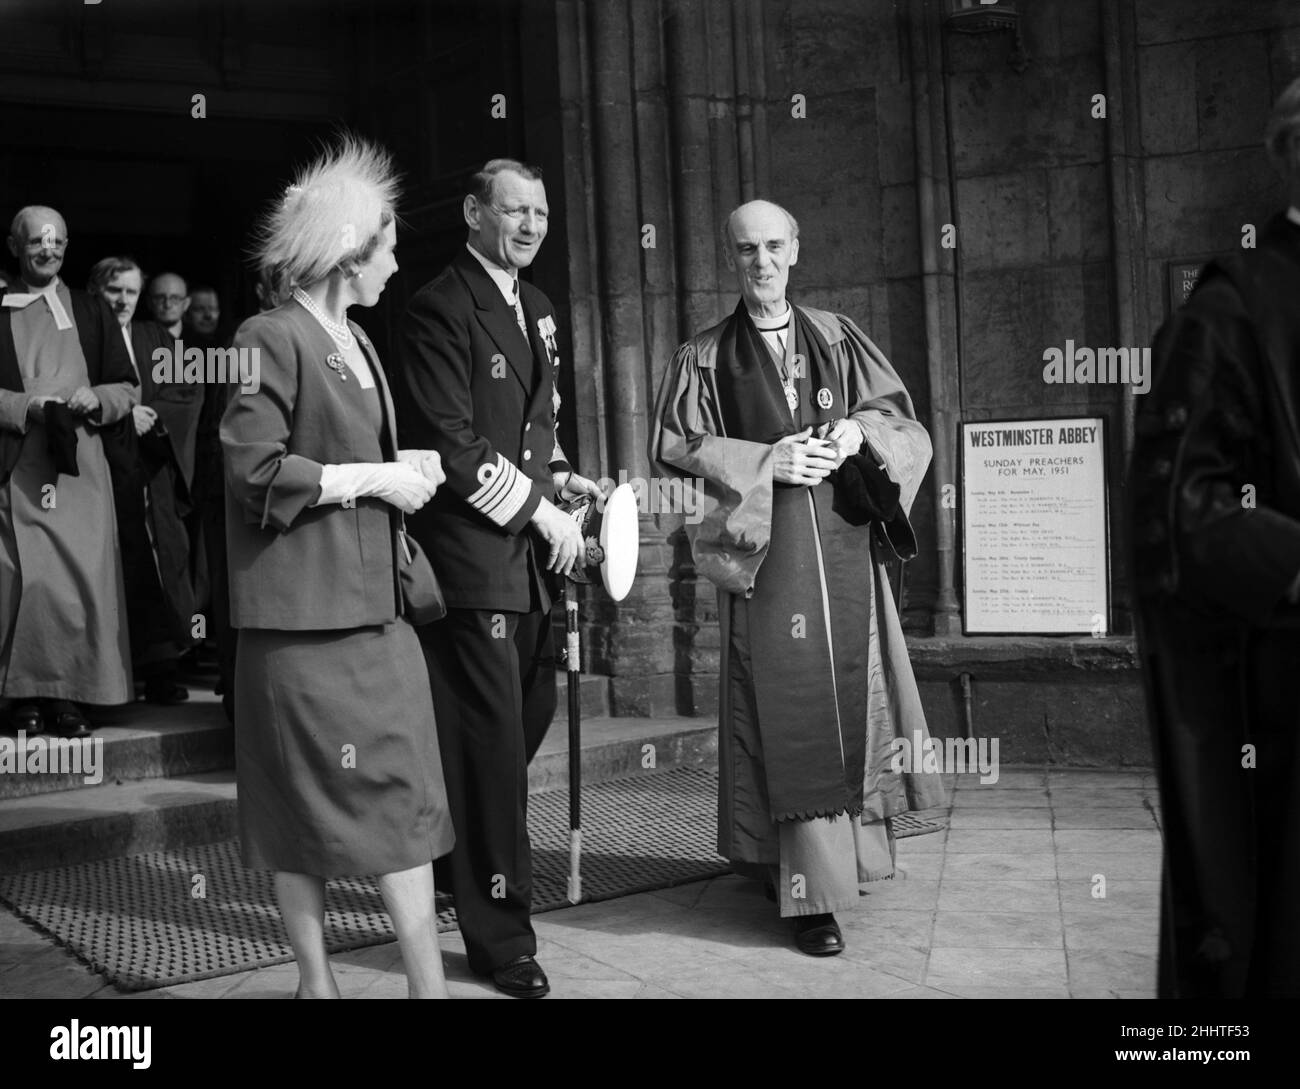 The state visit of King Frederick IX and Queen Ingrid of Denmark. Pictured on their visit to Westminster Abbey. 8th May 1951. Stock Photo